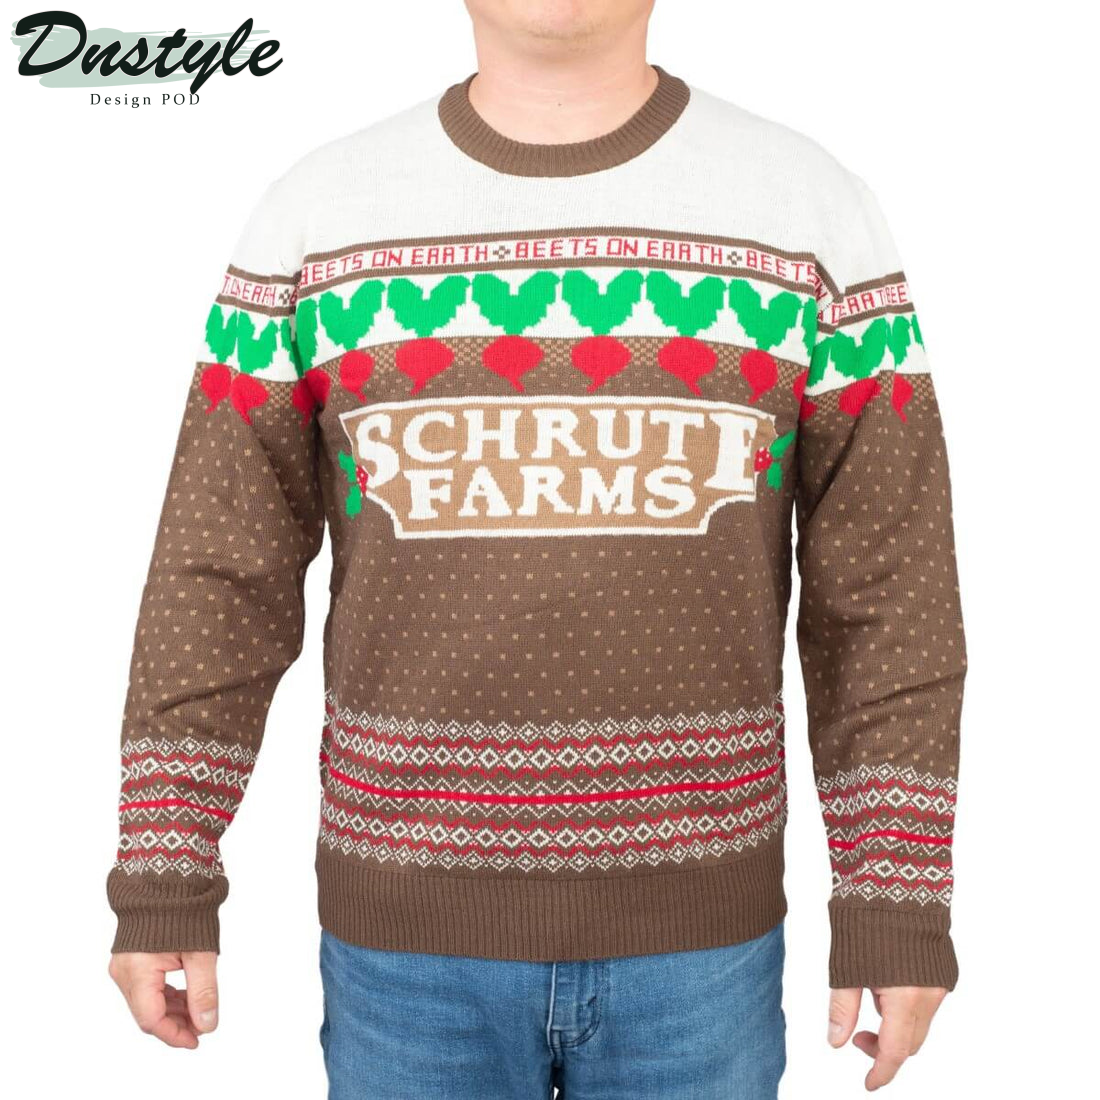 The Office Dwight Schrute Farms Beets Ugly Christmas Sweater